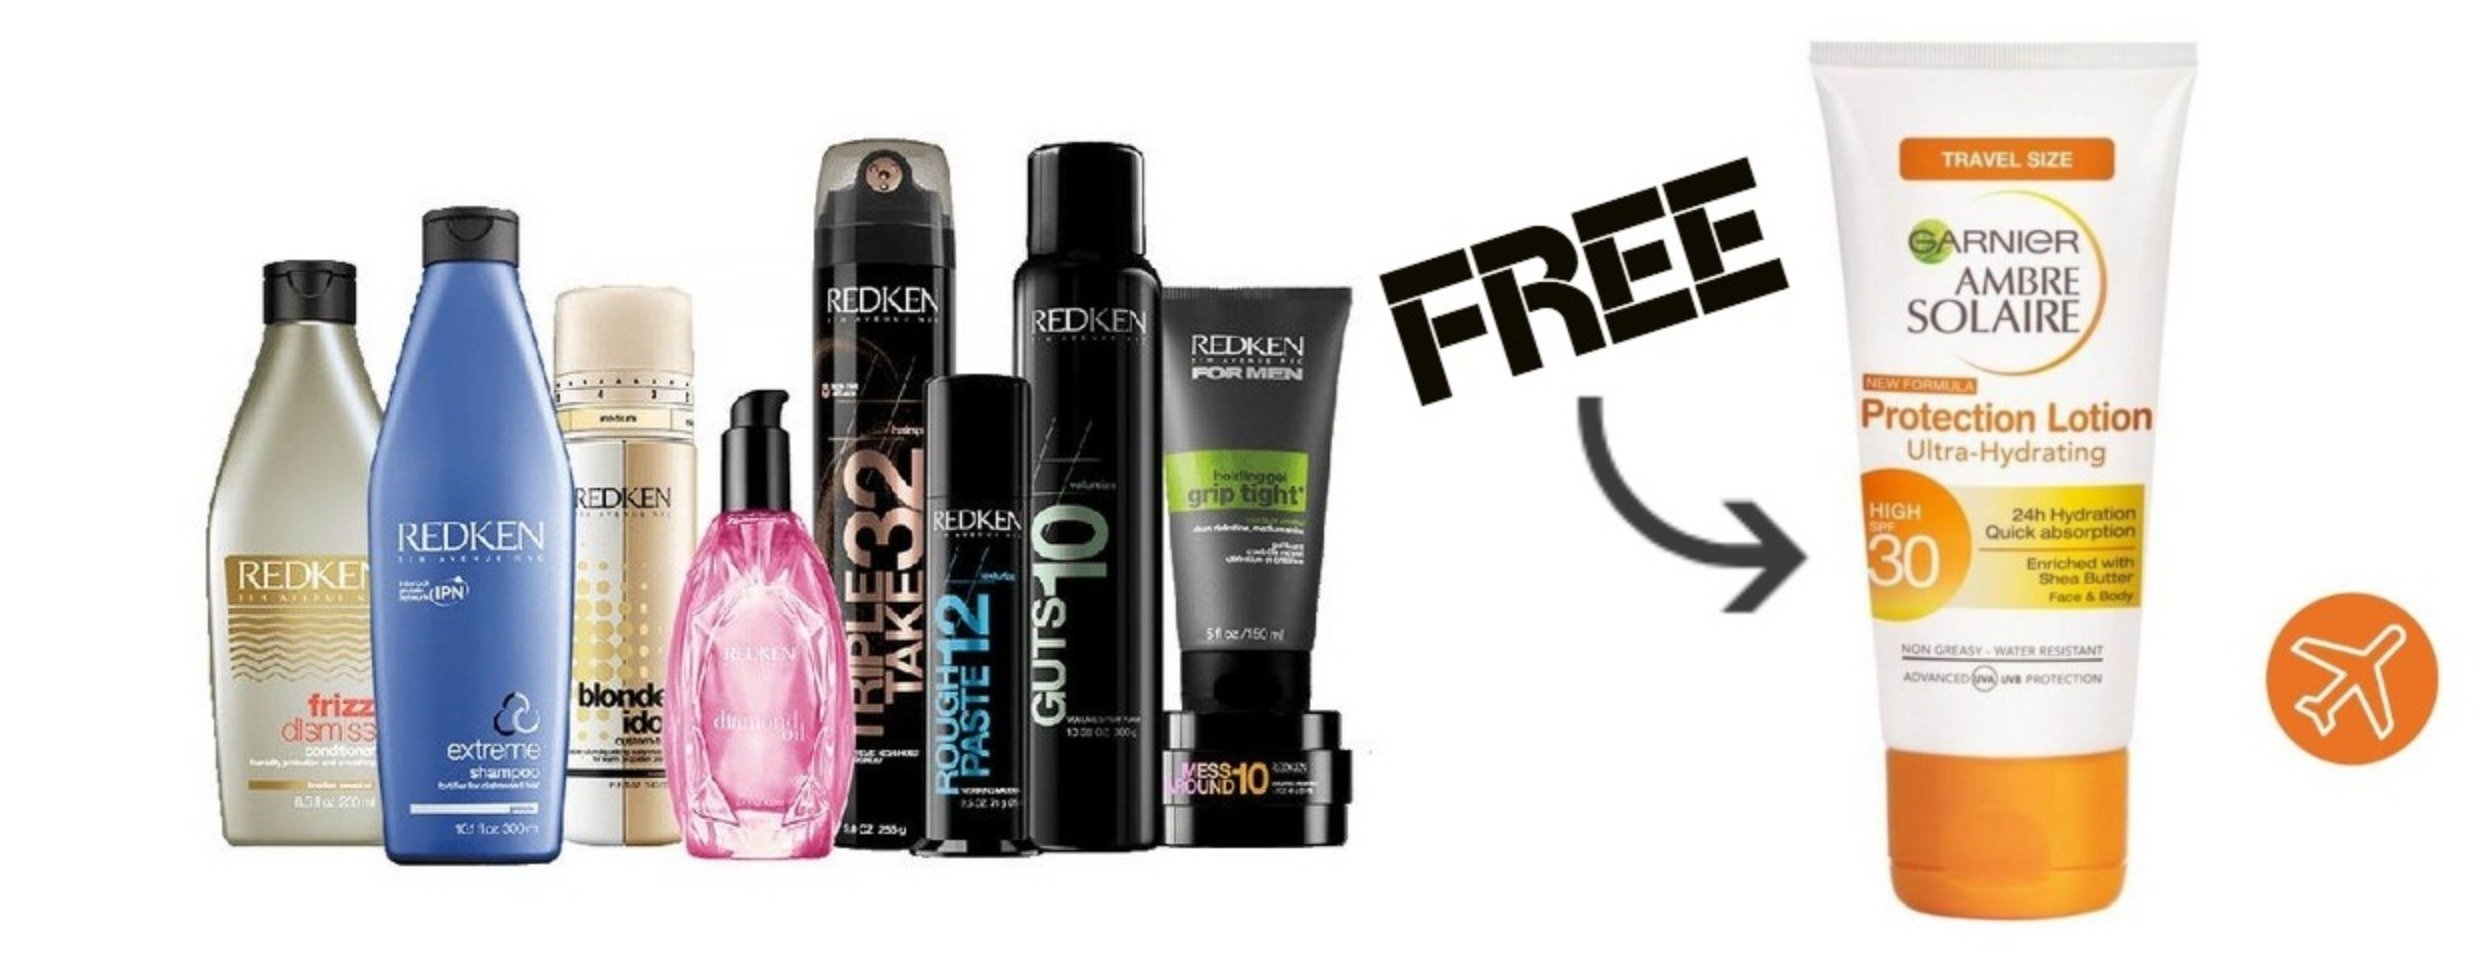 Buy Any 2 Redken Products & Get a FREE Travel Size Sun Cream